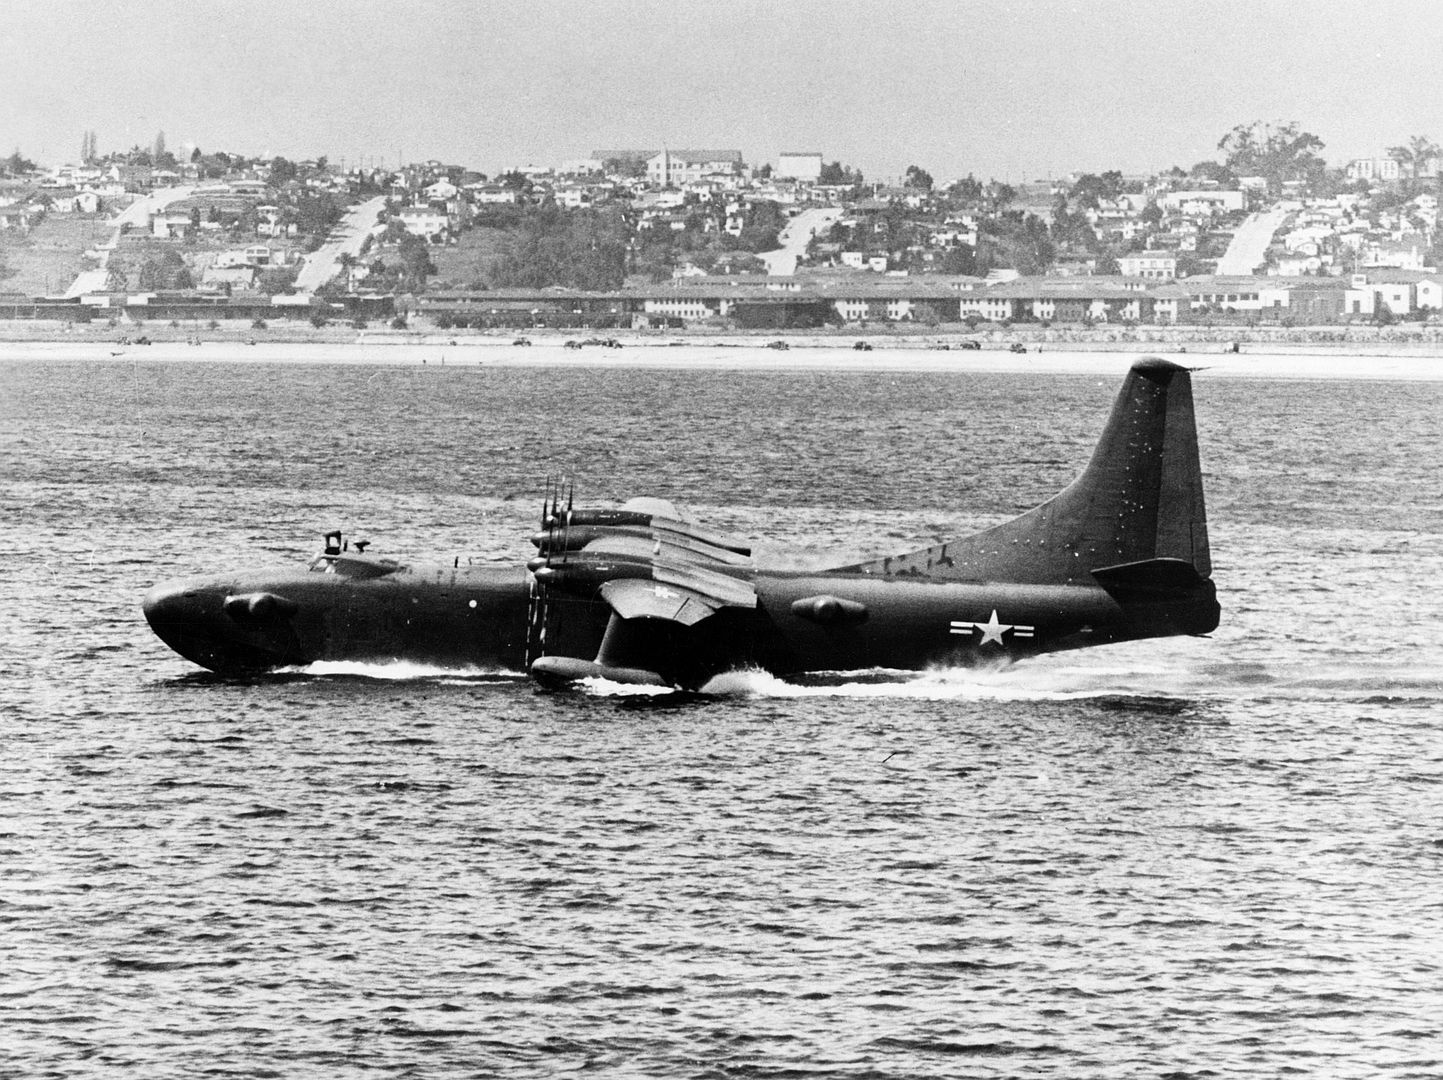 1 Tradewind Prototype On The Day Of Its First Flight On 18 April 1950 At San Diego